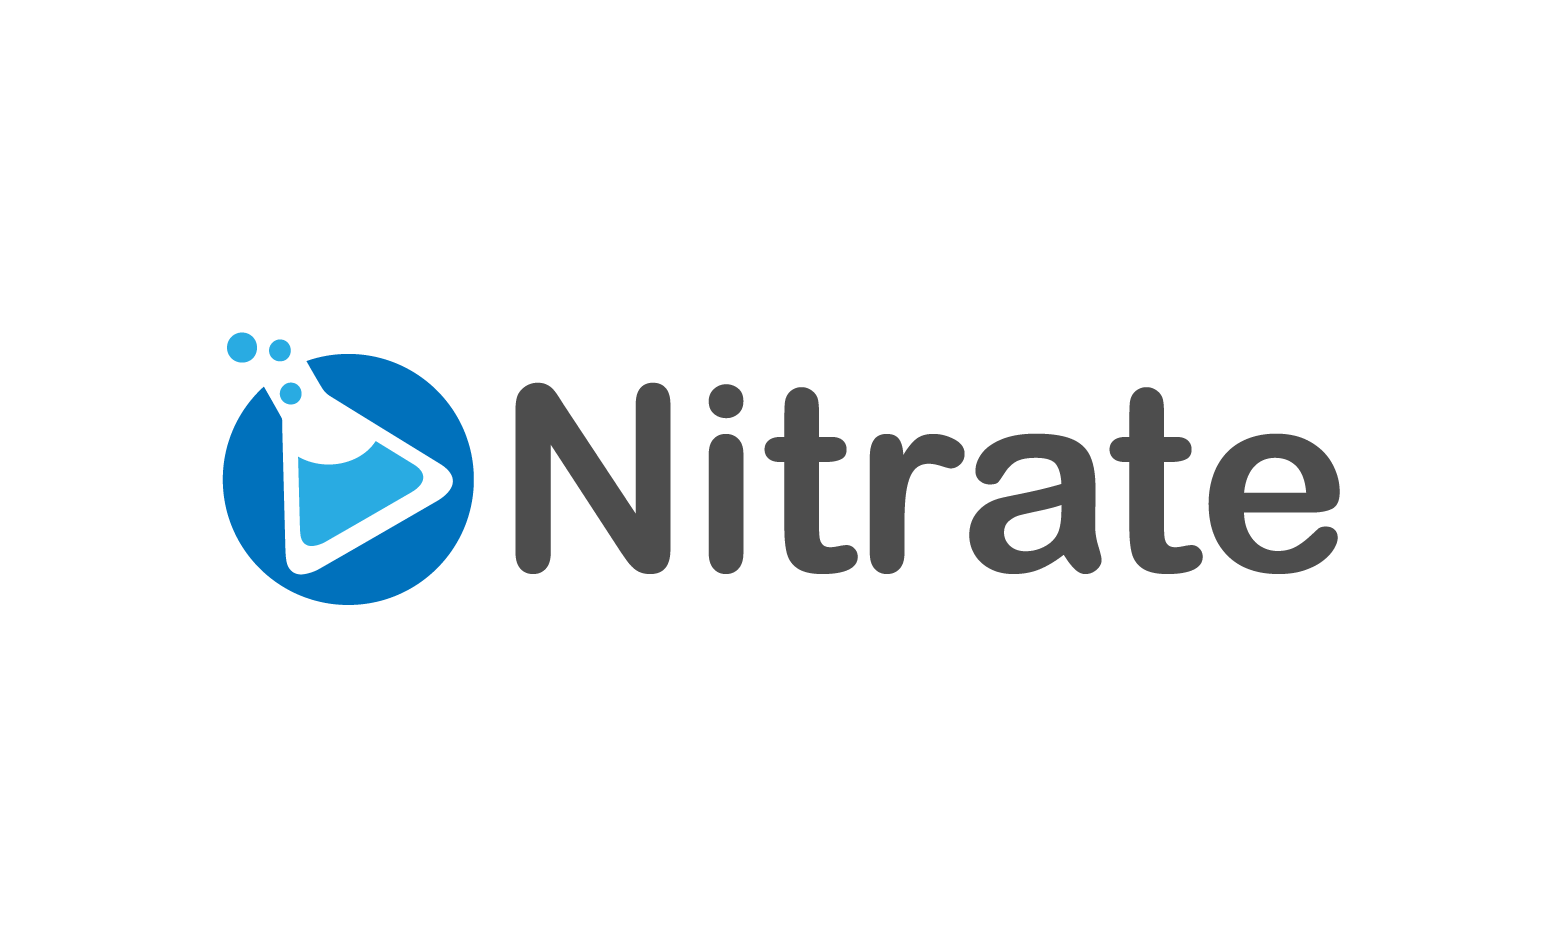 Nitrate.io is for sale